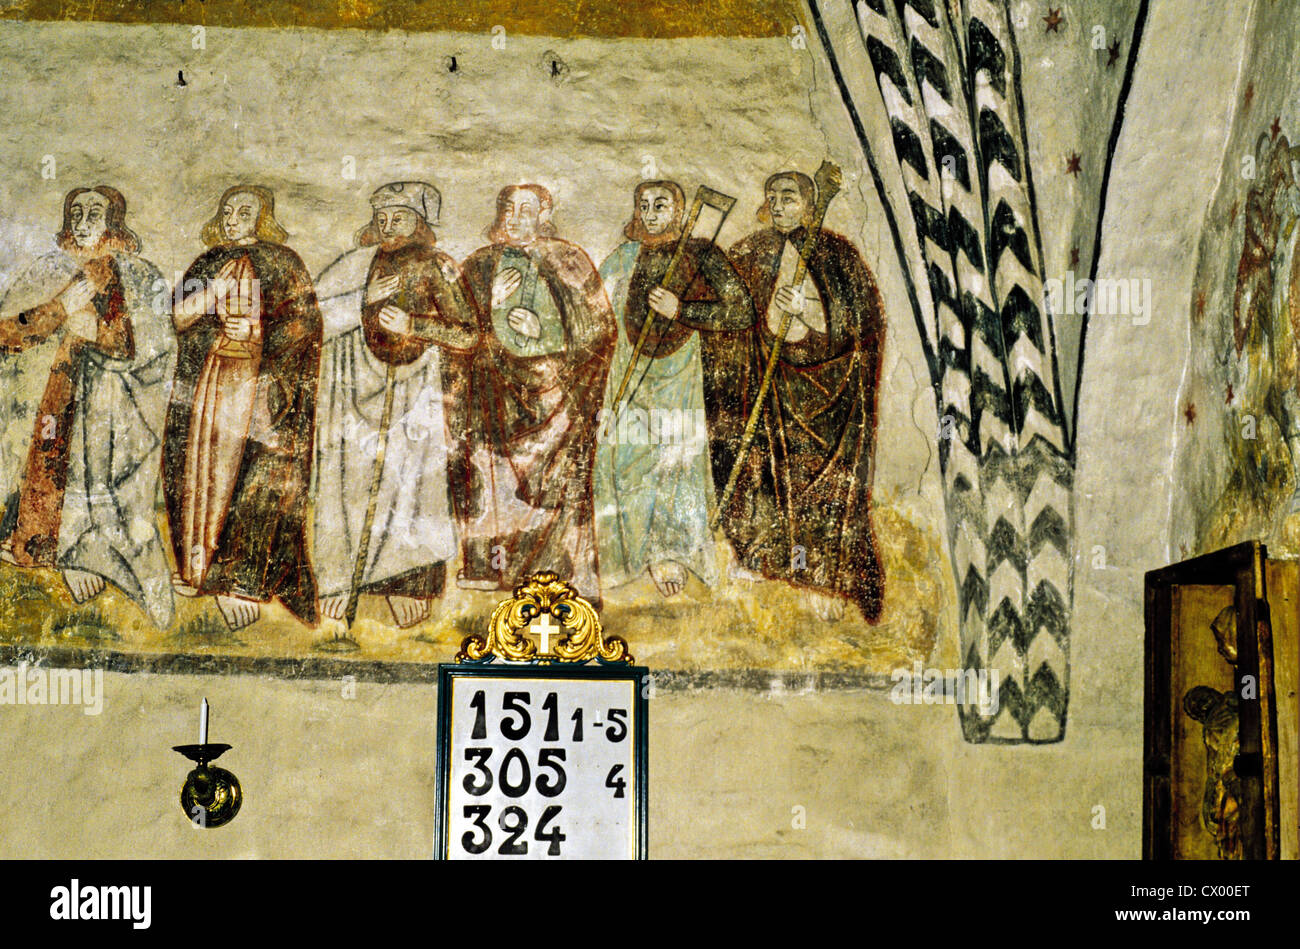 A partial view of a 16th century mural depicting the twelve apostles in the Church of St. James in Rymattyla, Finland Stock Photo